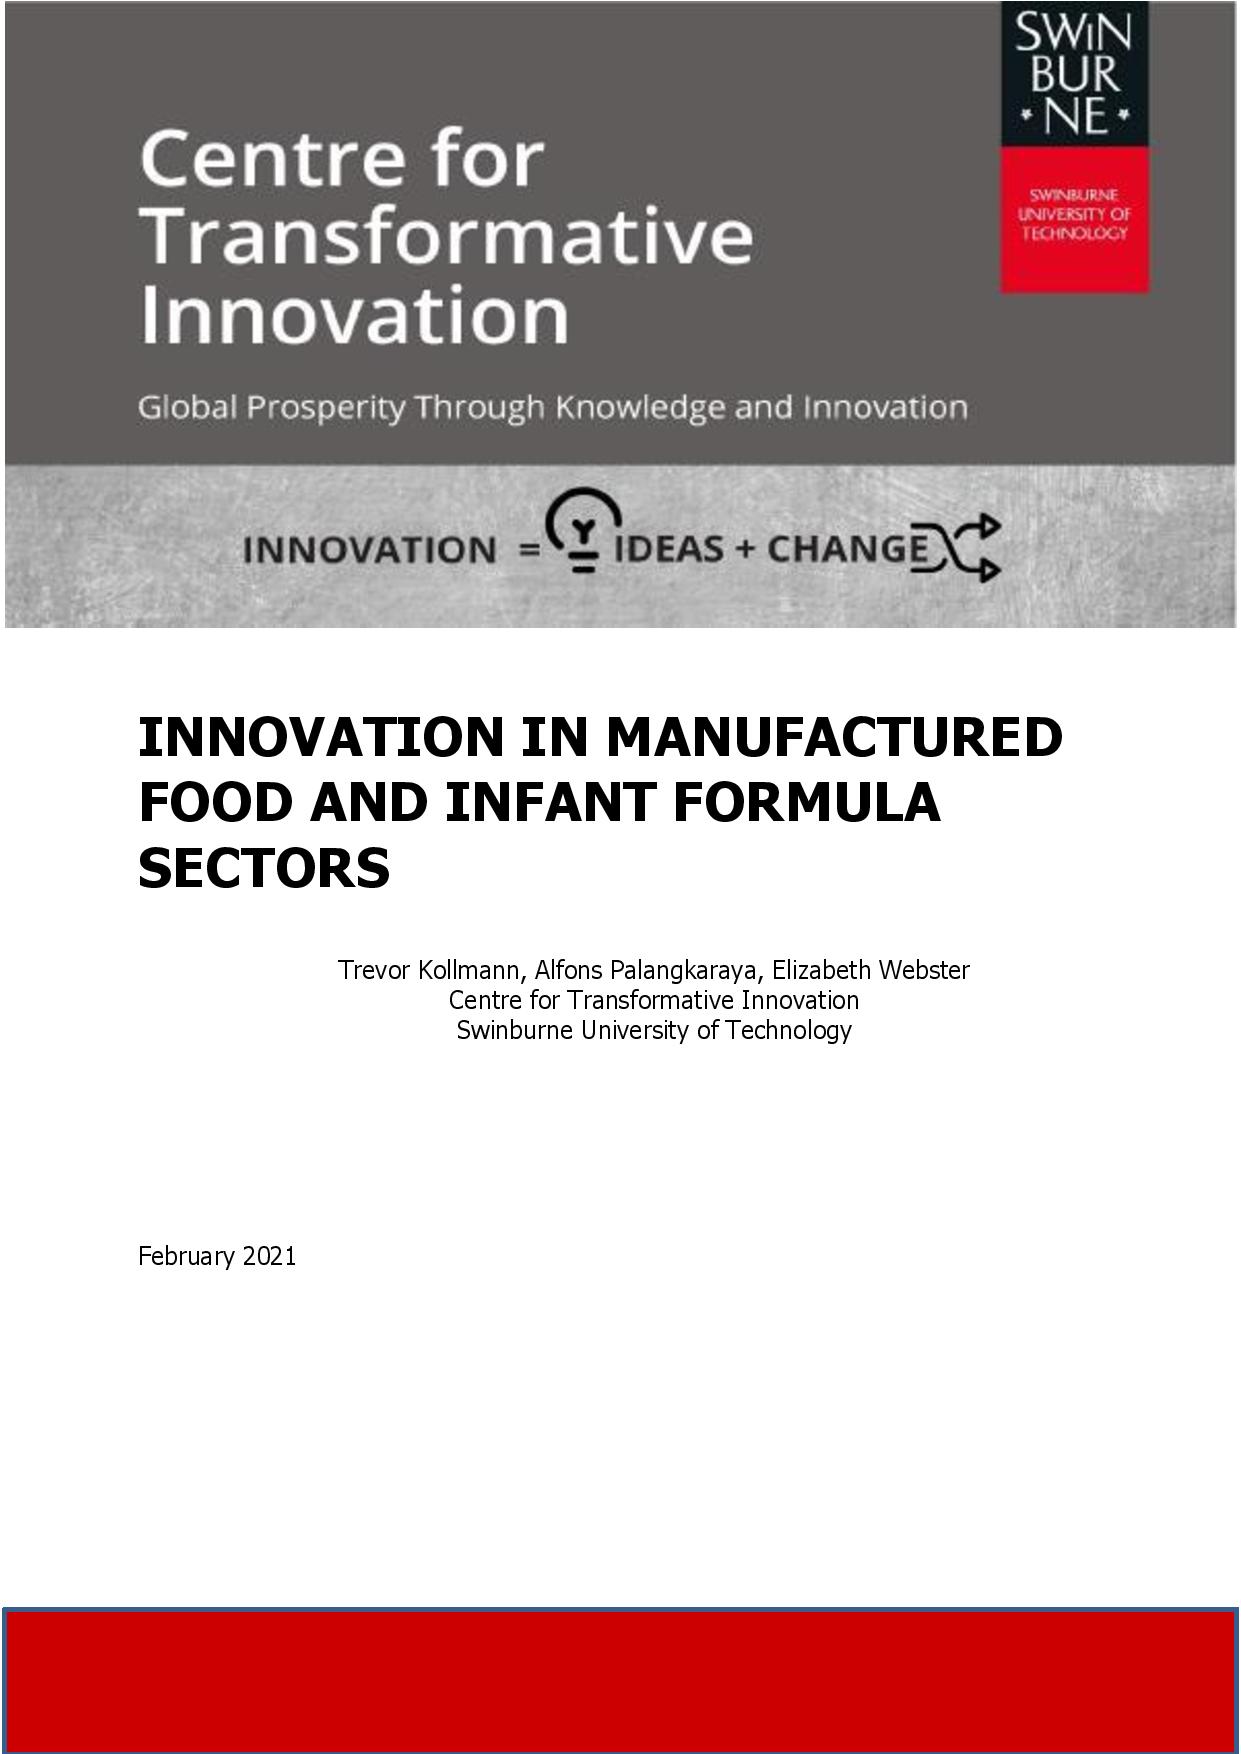 Innovation in Manufactured Food and Infant Formula Sectors